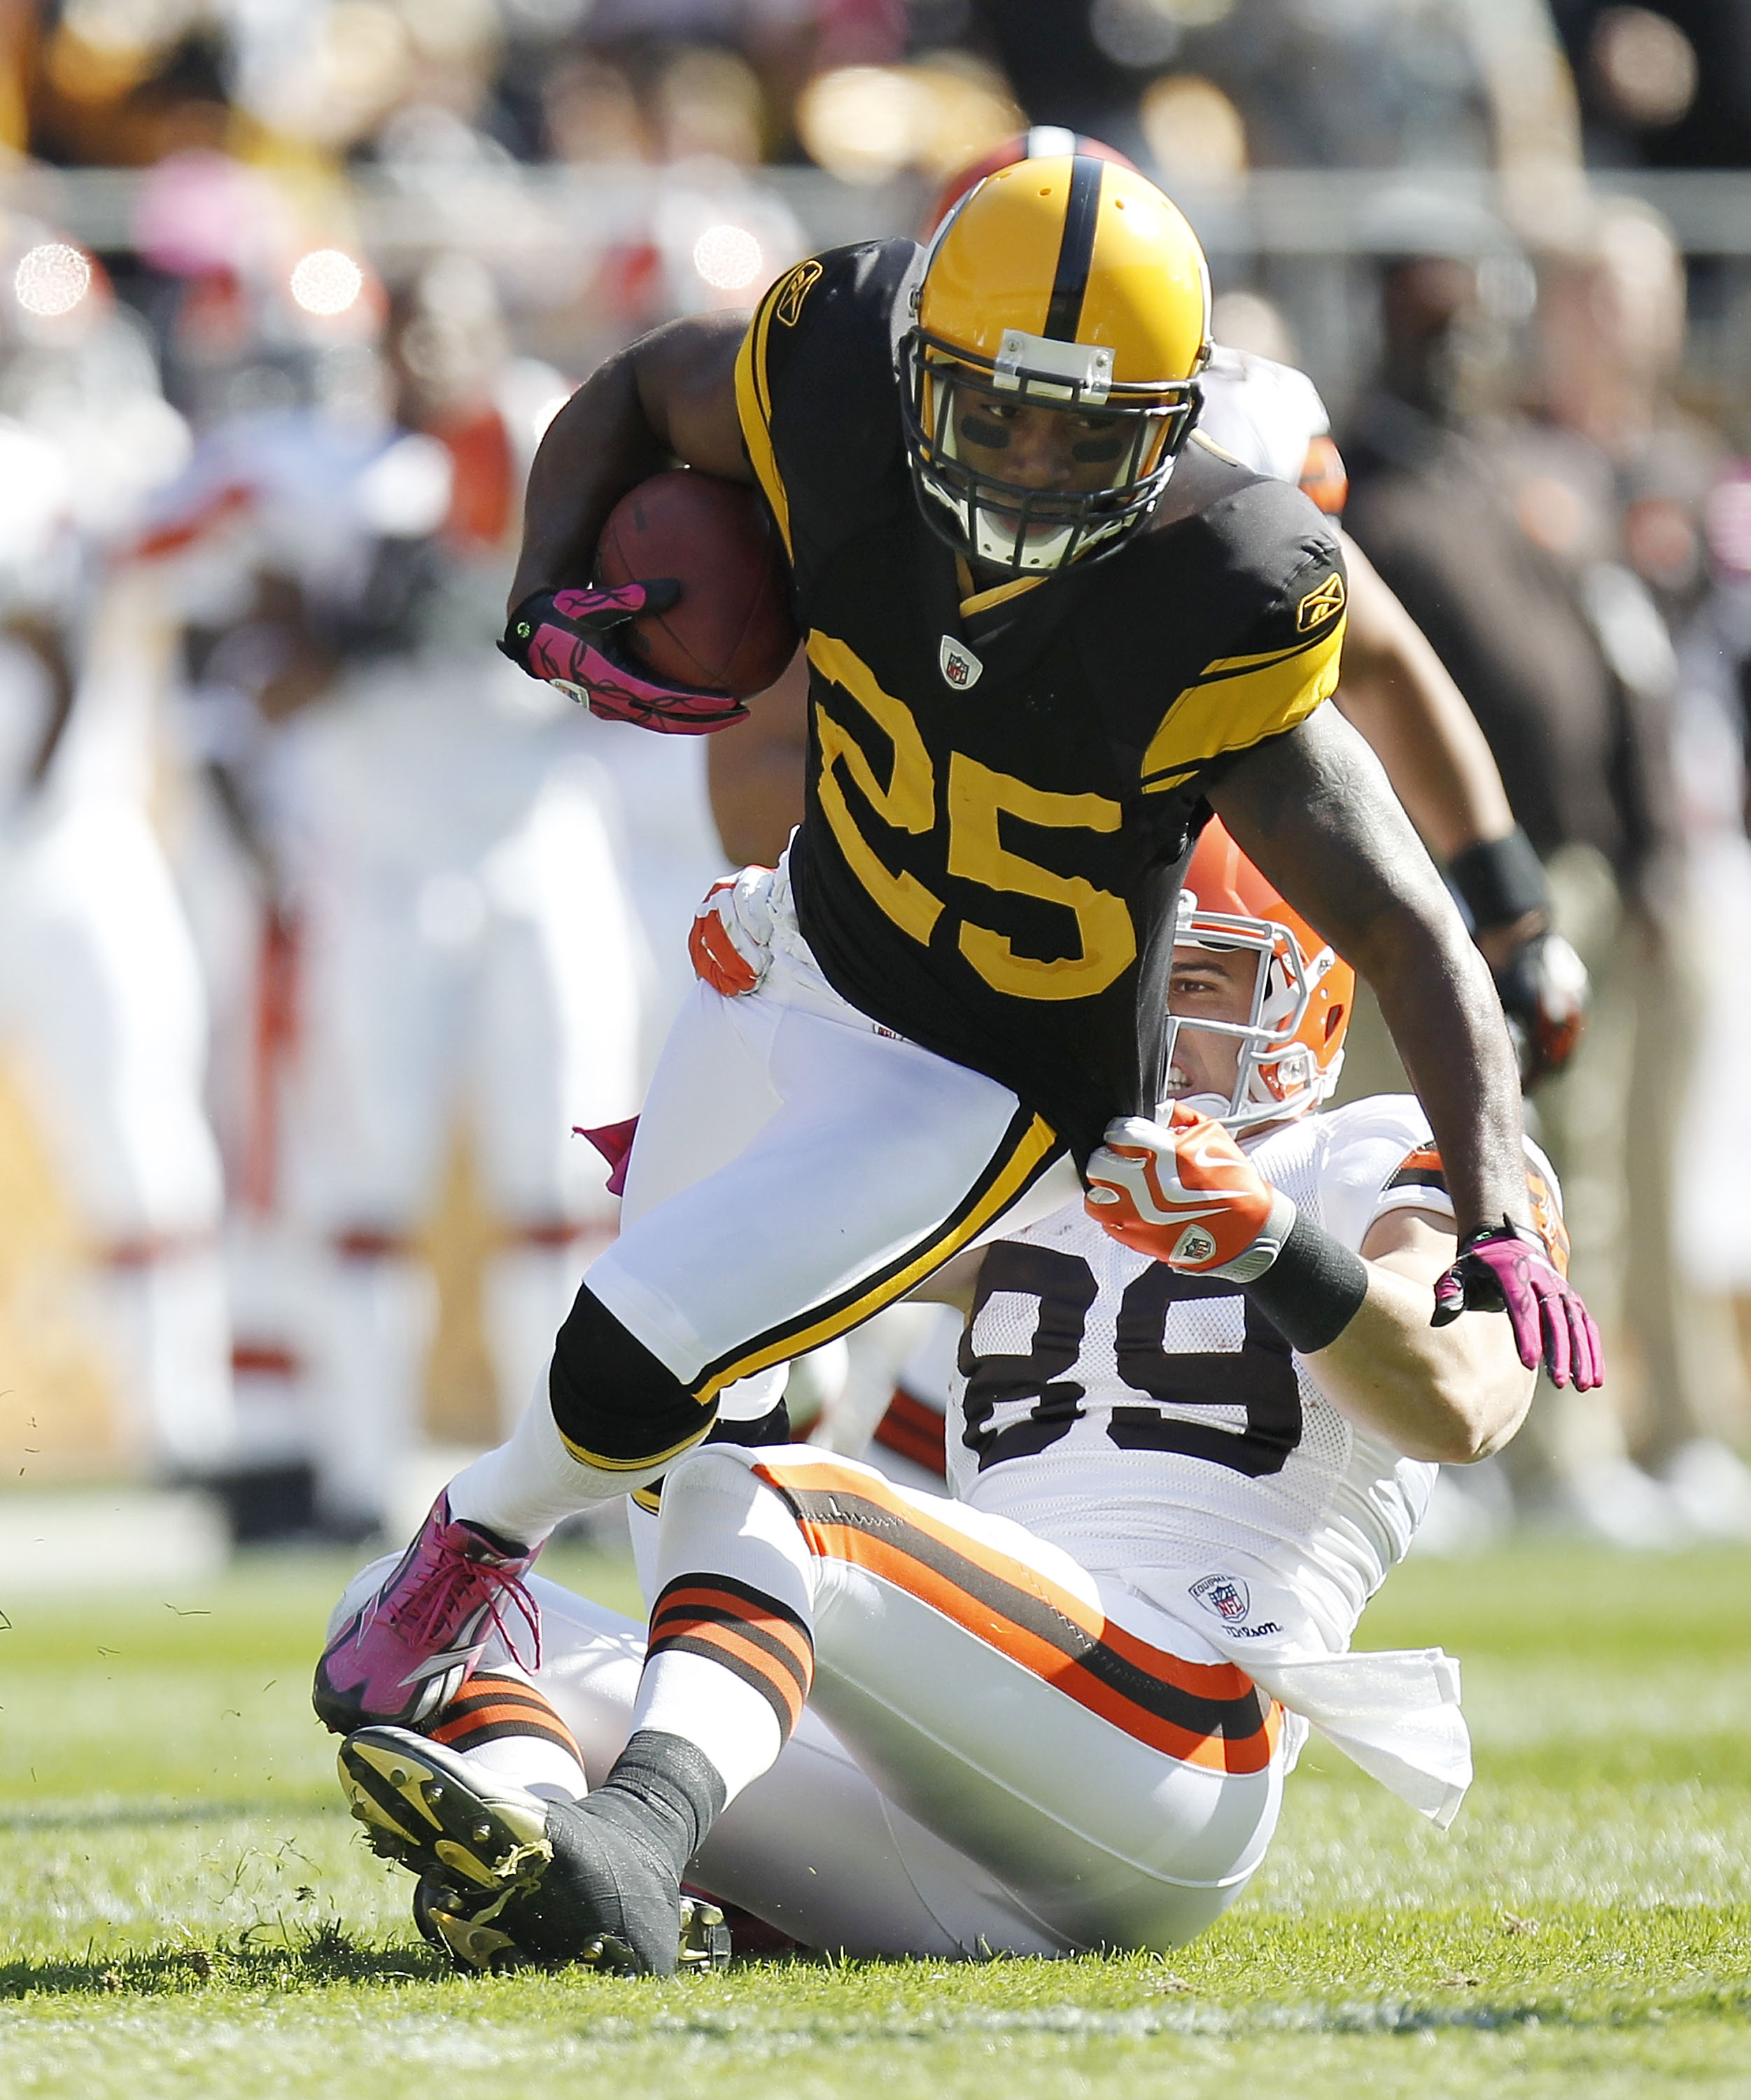 PITTSBURGH - OCTOBER 17:  Ryan Clark #25 of the Pittsburgh Steelers tries to escape the tackle of Evan Moore #89 of the Cleveland Browns after a first quarter interception on October 17, 2010 at Heinz Field in Pittsburgh, Pennsylvania.  (Photo by Gregory